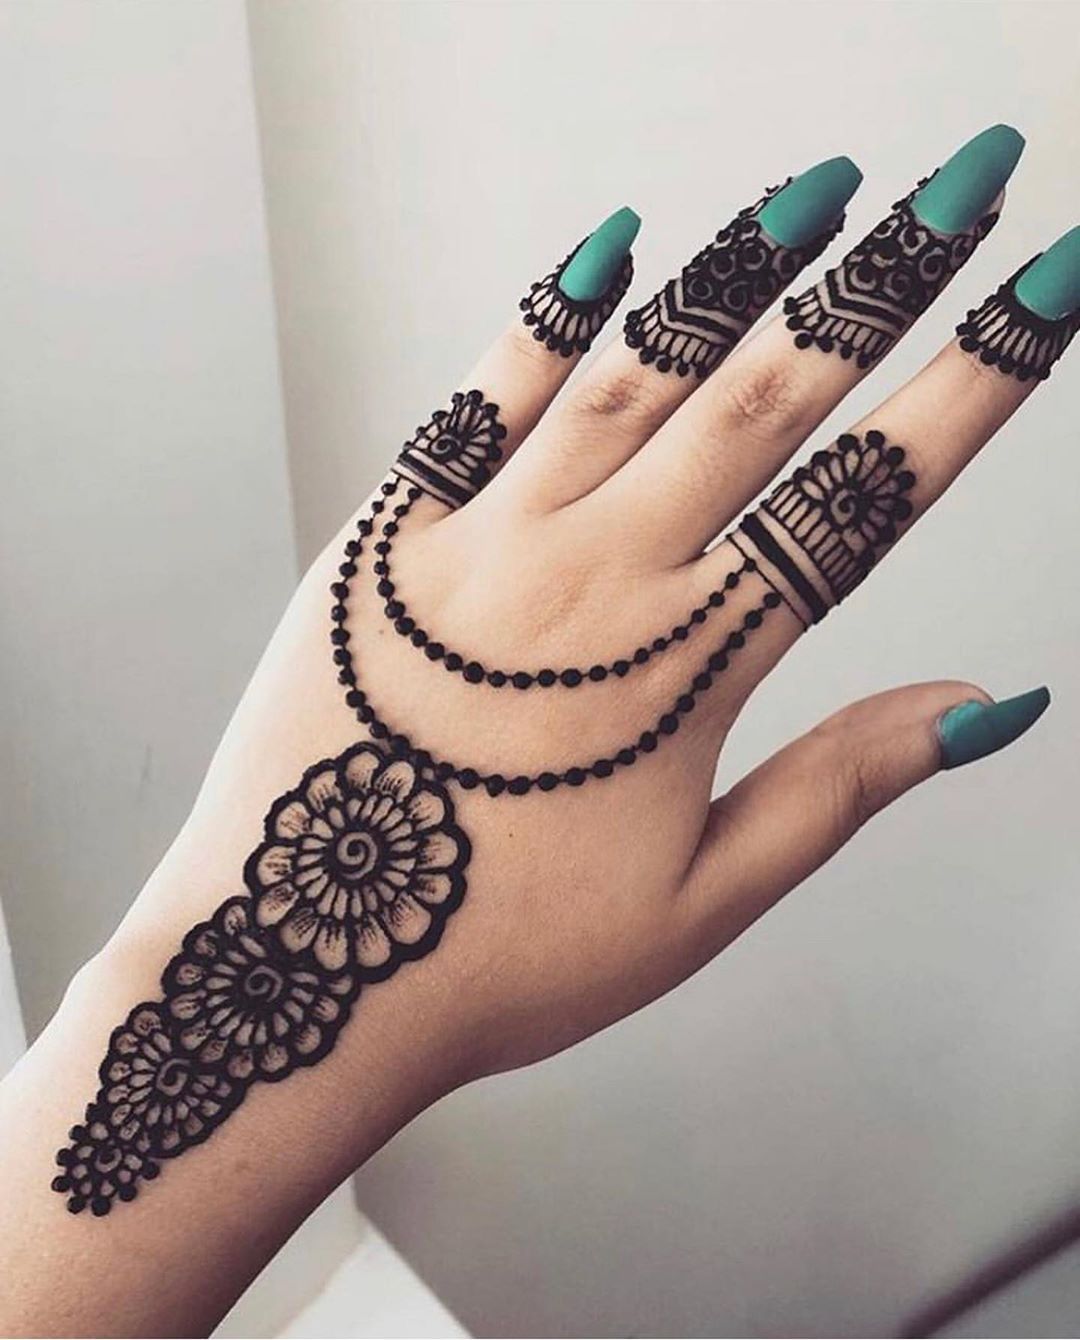 Pakistani Bride On Instagram: “Henna Inspo For Every Occasion ??? Henna ...